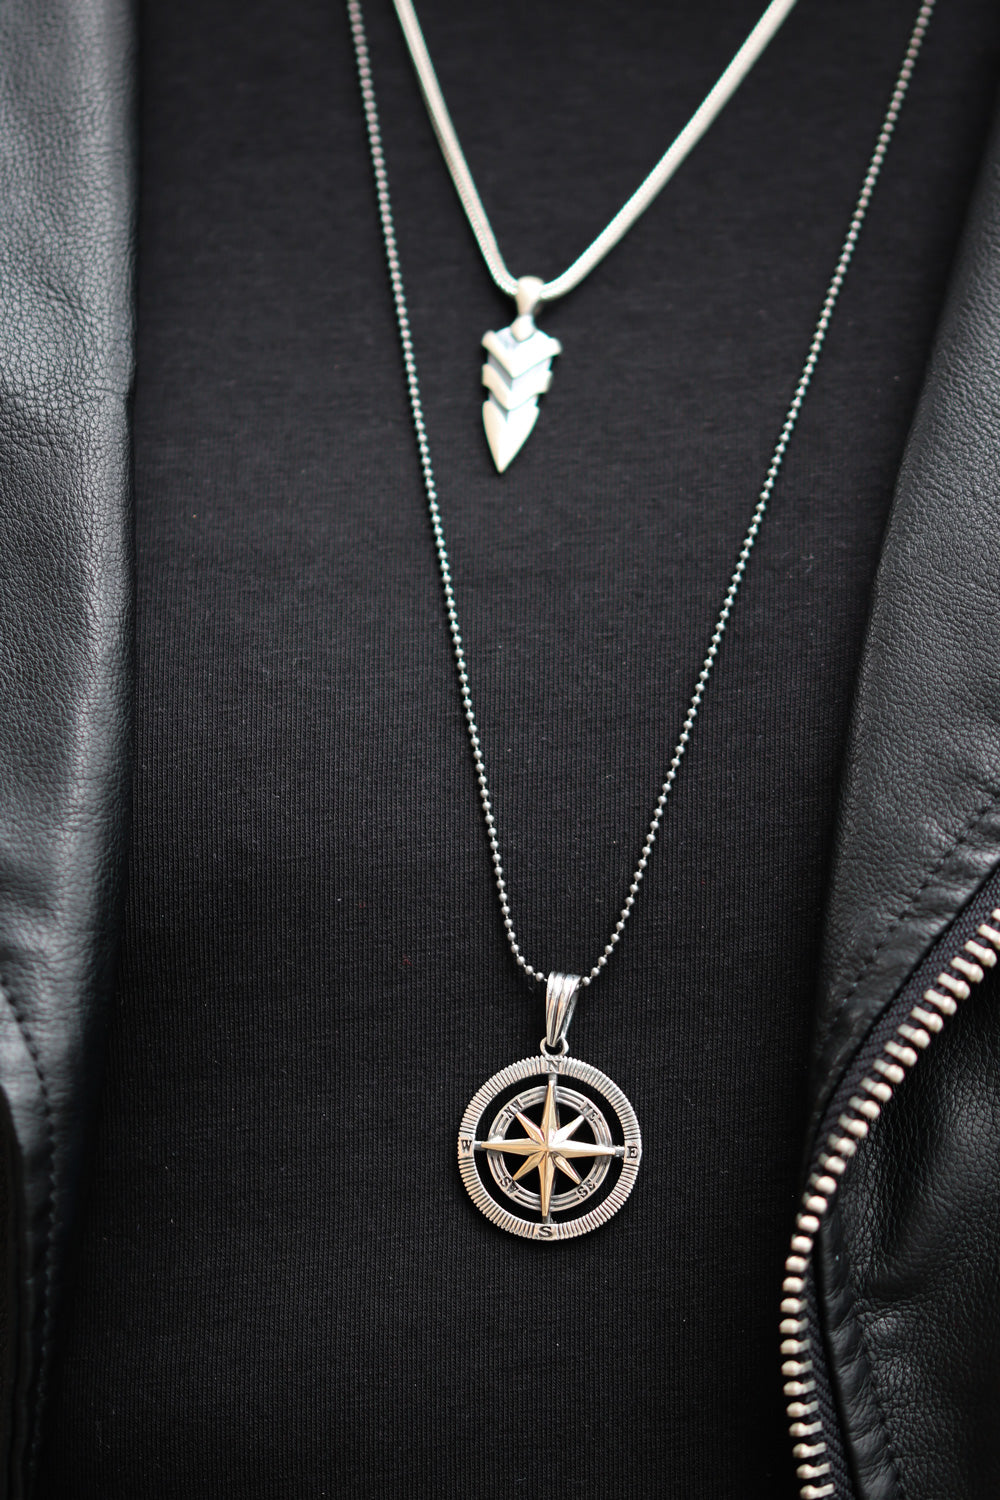 Men's necklace with compass pendant in Sterling silver